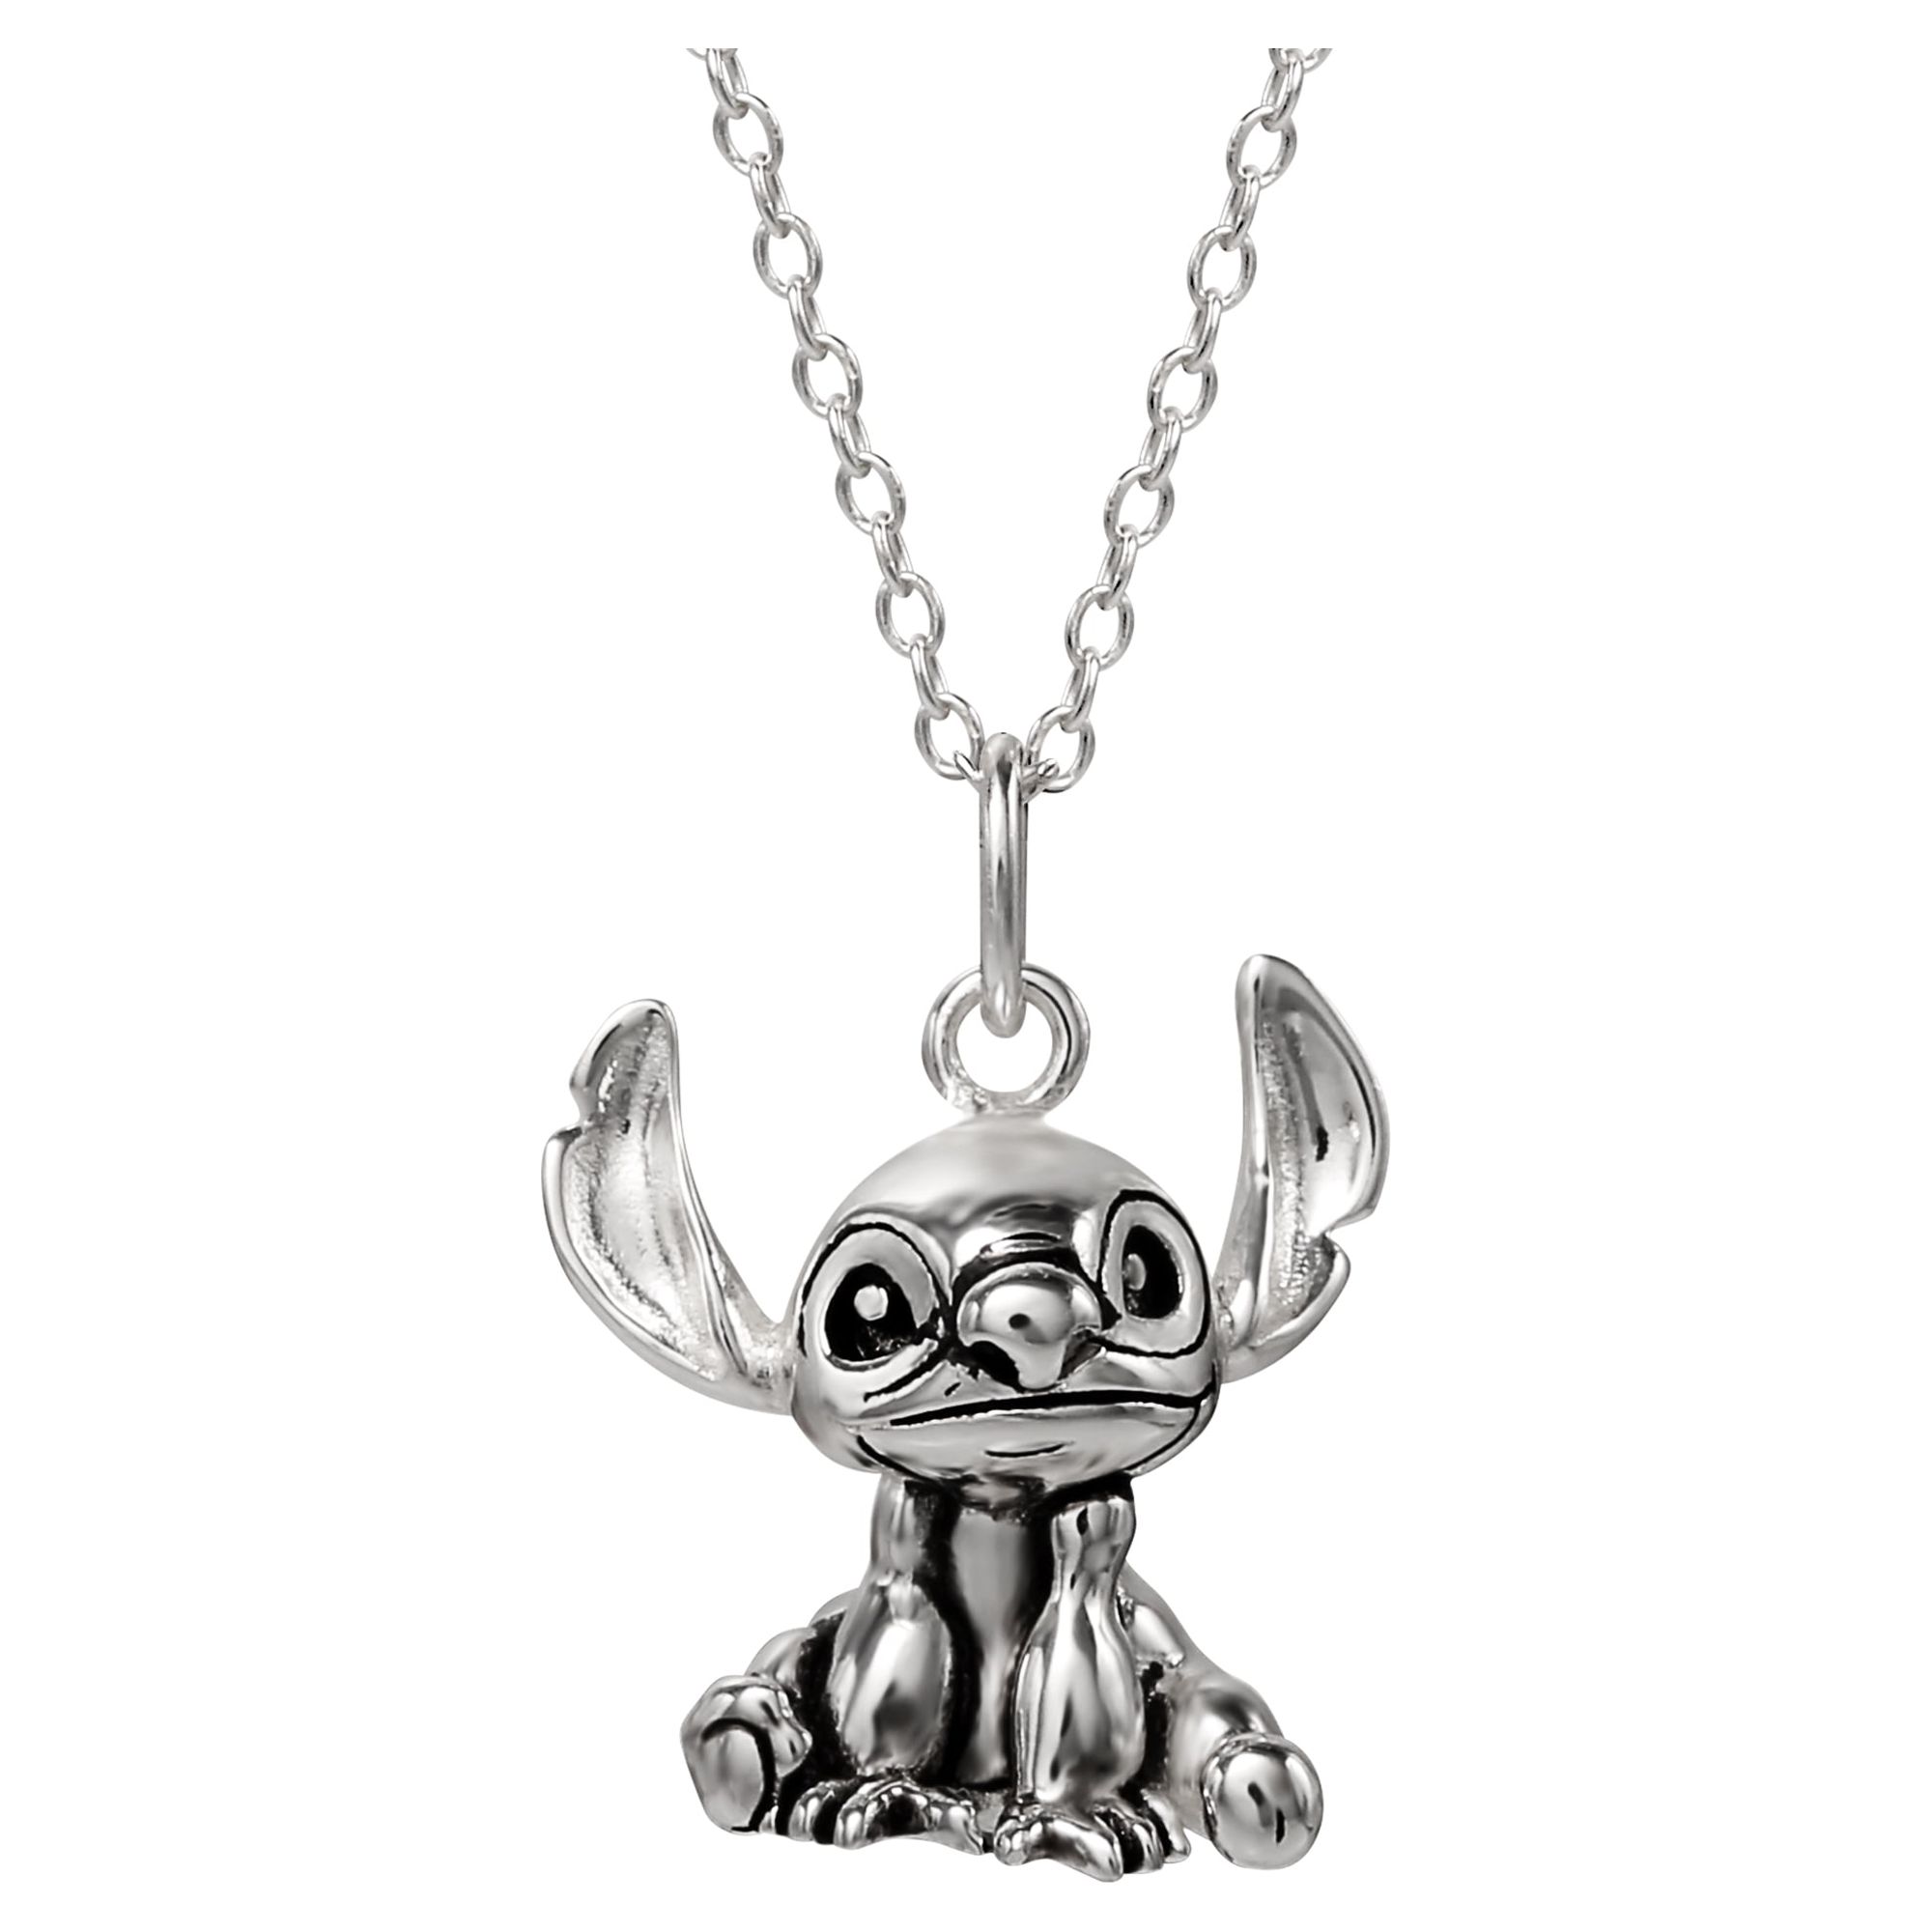 Disney Lilo and Stitch Women's Sterling Silver Stitch Pendant Necklace, 18" Chain - image 1 of 5